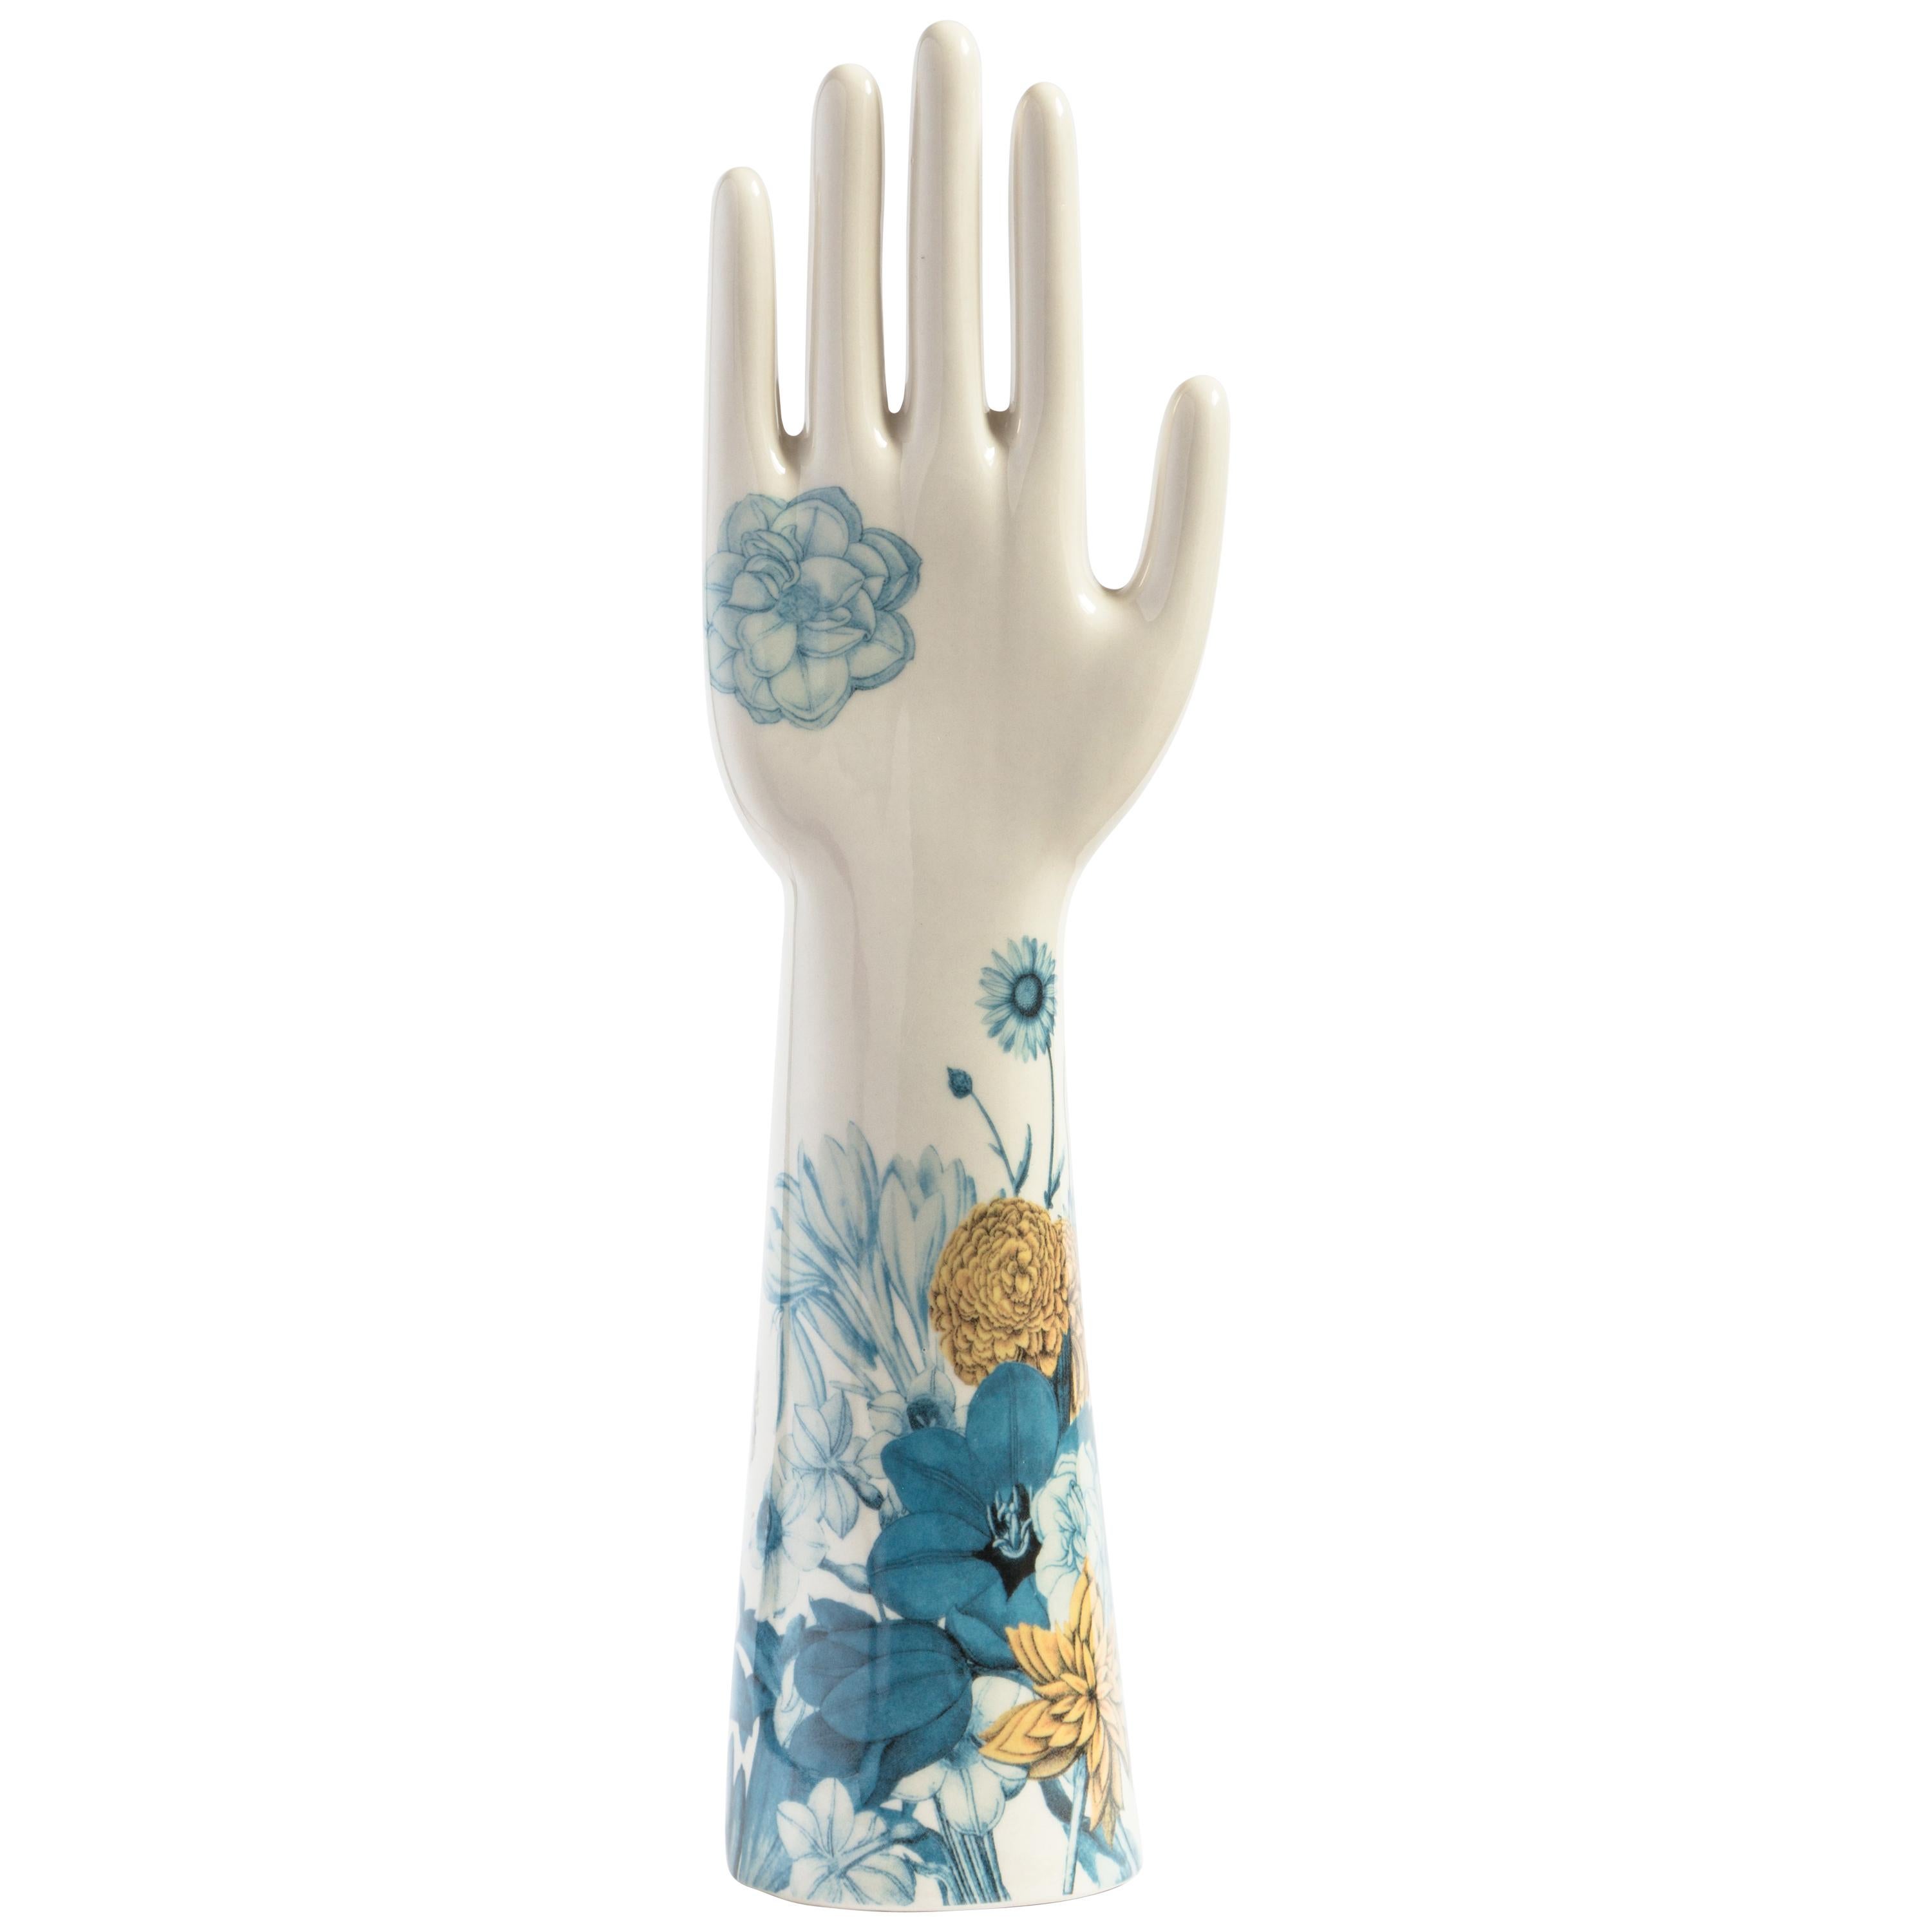 Anatomica, Porcelain Hand with Flowers Decoration by Vito Nesta